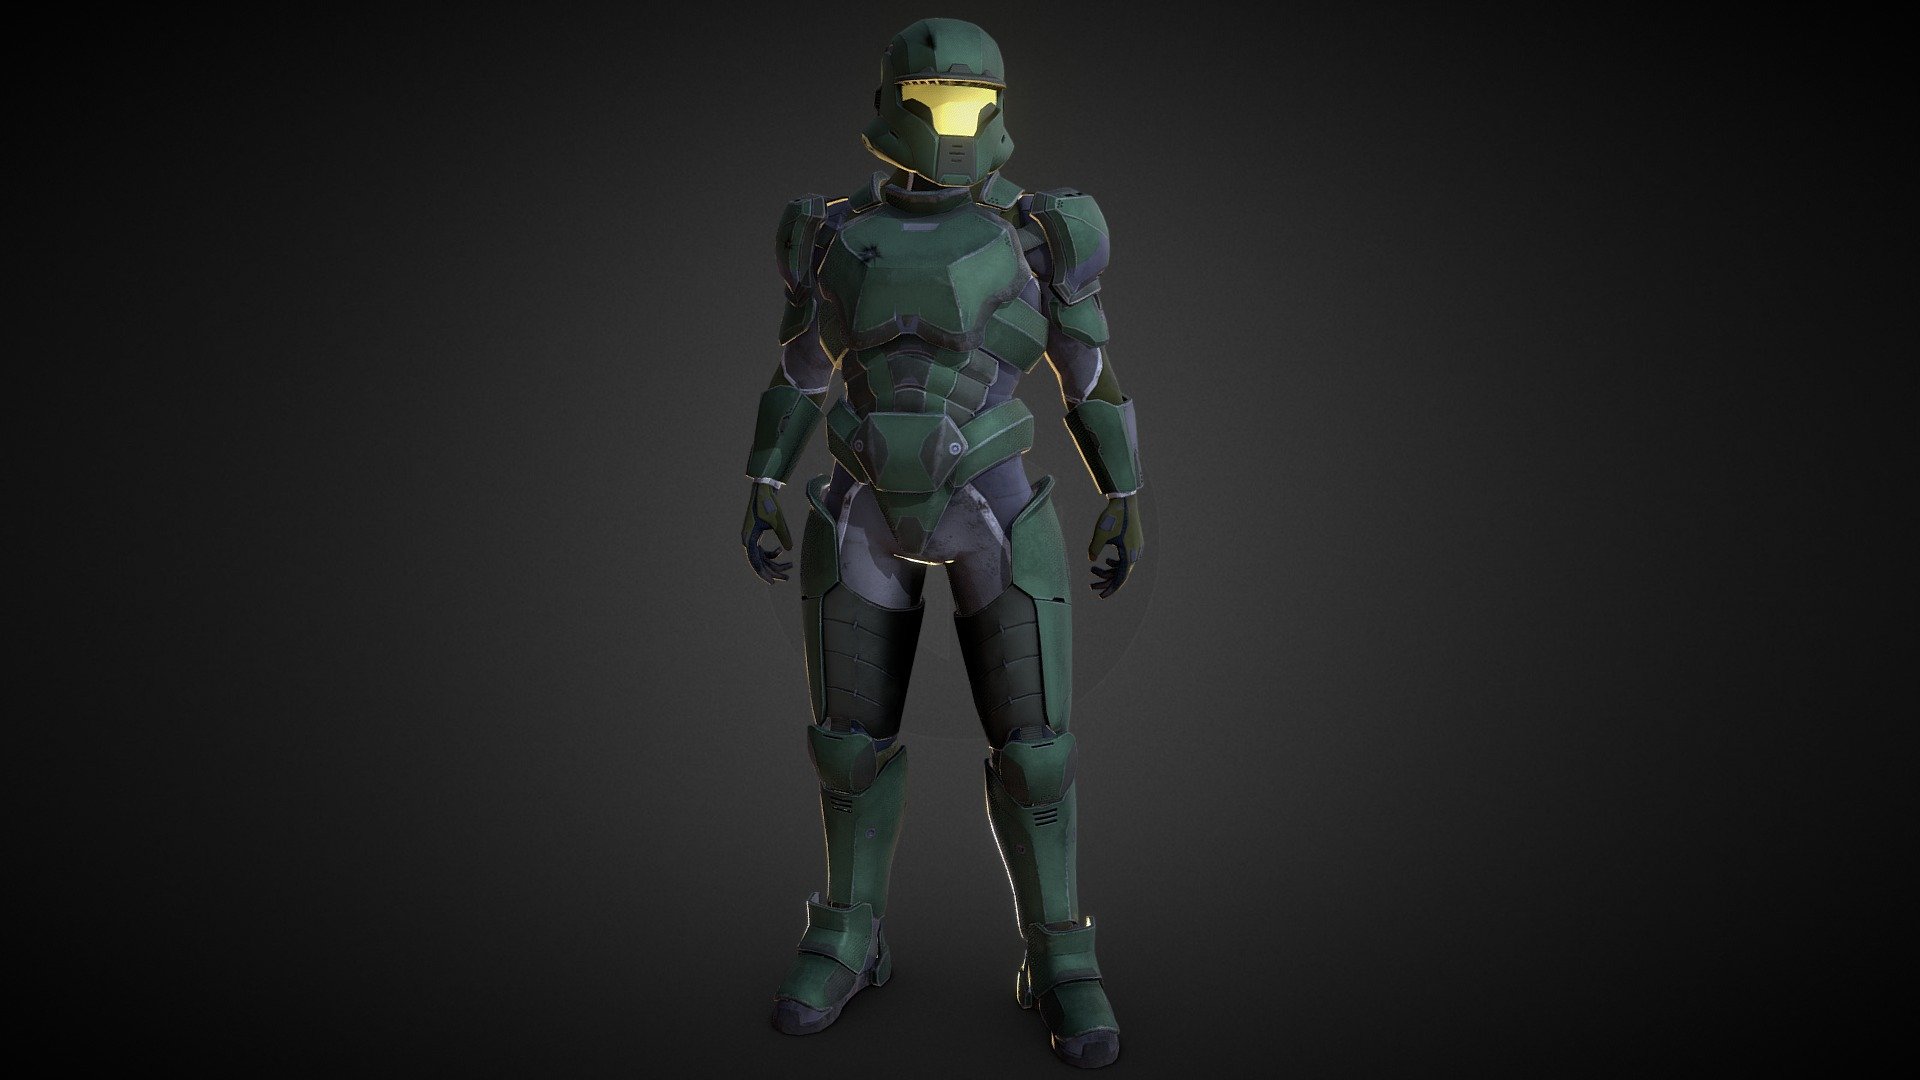 The Grom Combat Armor is a hardsuit manufactured by MOC Defense on Beldua. It utilizes a passive load-bearing exoskeleton to redistribute the weight of the operator's armor plates and equipment to the ground, improving overall combat effectiveness and decreasing battle fatigue. The armor plates can be interchanged with any compatible armor that can attach to the exoskeleton frame, including the armor plating of combat robots, such as the TR series. 

Armor designed for Nanotide (https://linktr.ee/nanotide) in one of their many stories, set in the sci-fi setting of Beldua (https://toyhou.se/Nanotide/characters/folder:1384020). 
Project can be also found on ArtStation (https://www.artstation.com/artwork/qQKgVR) 3d model